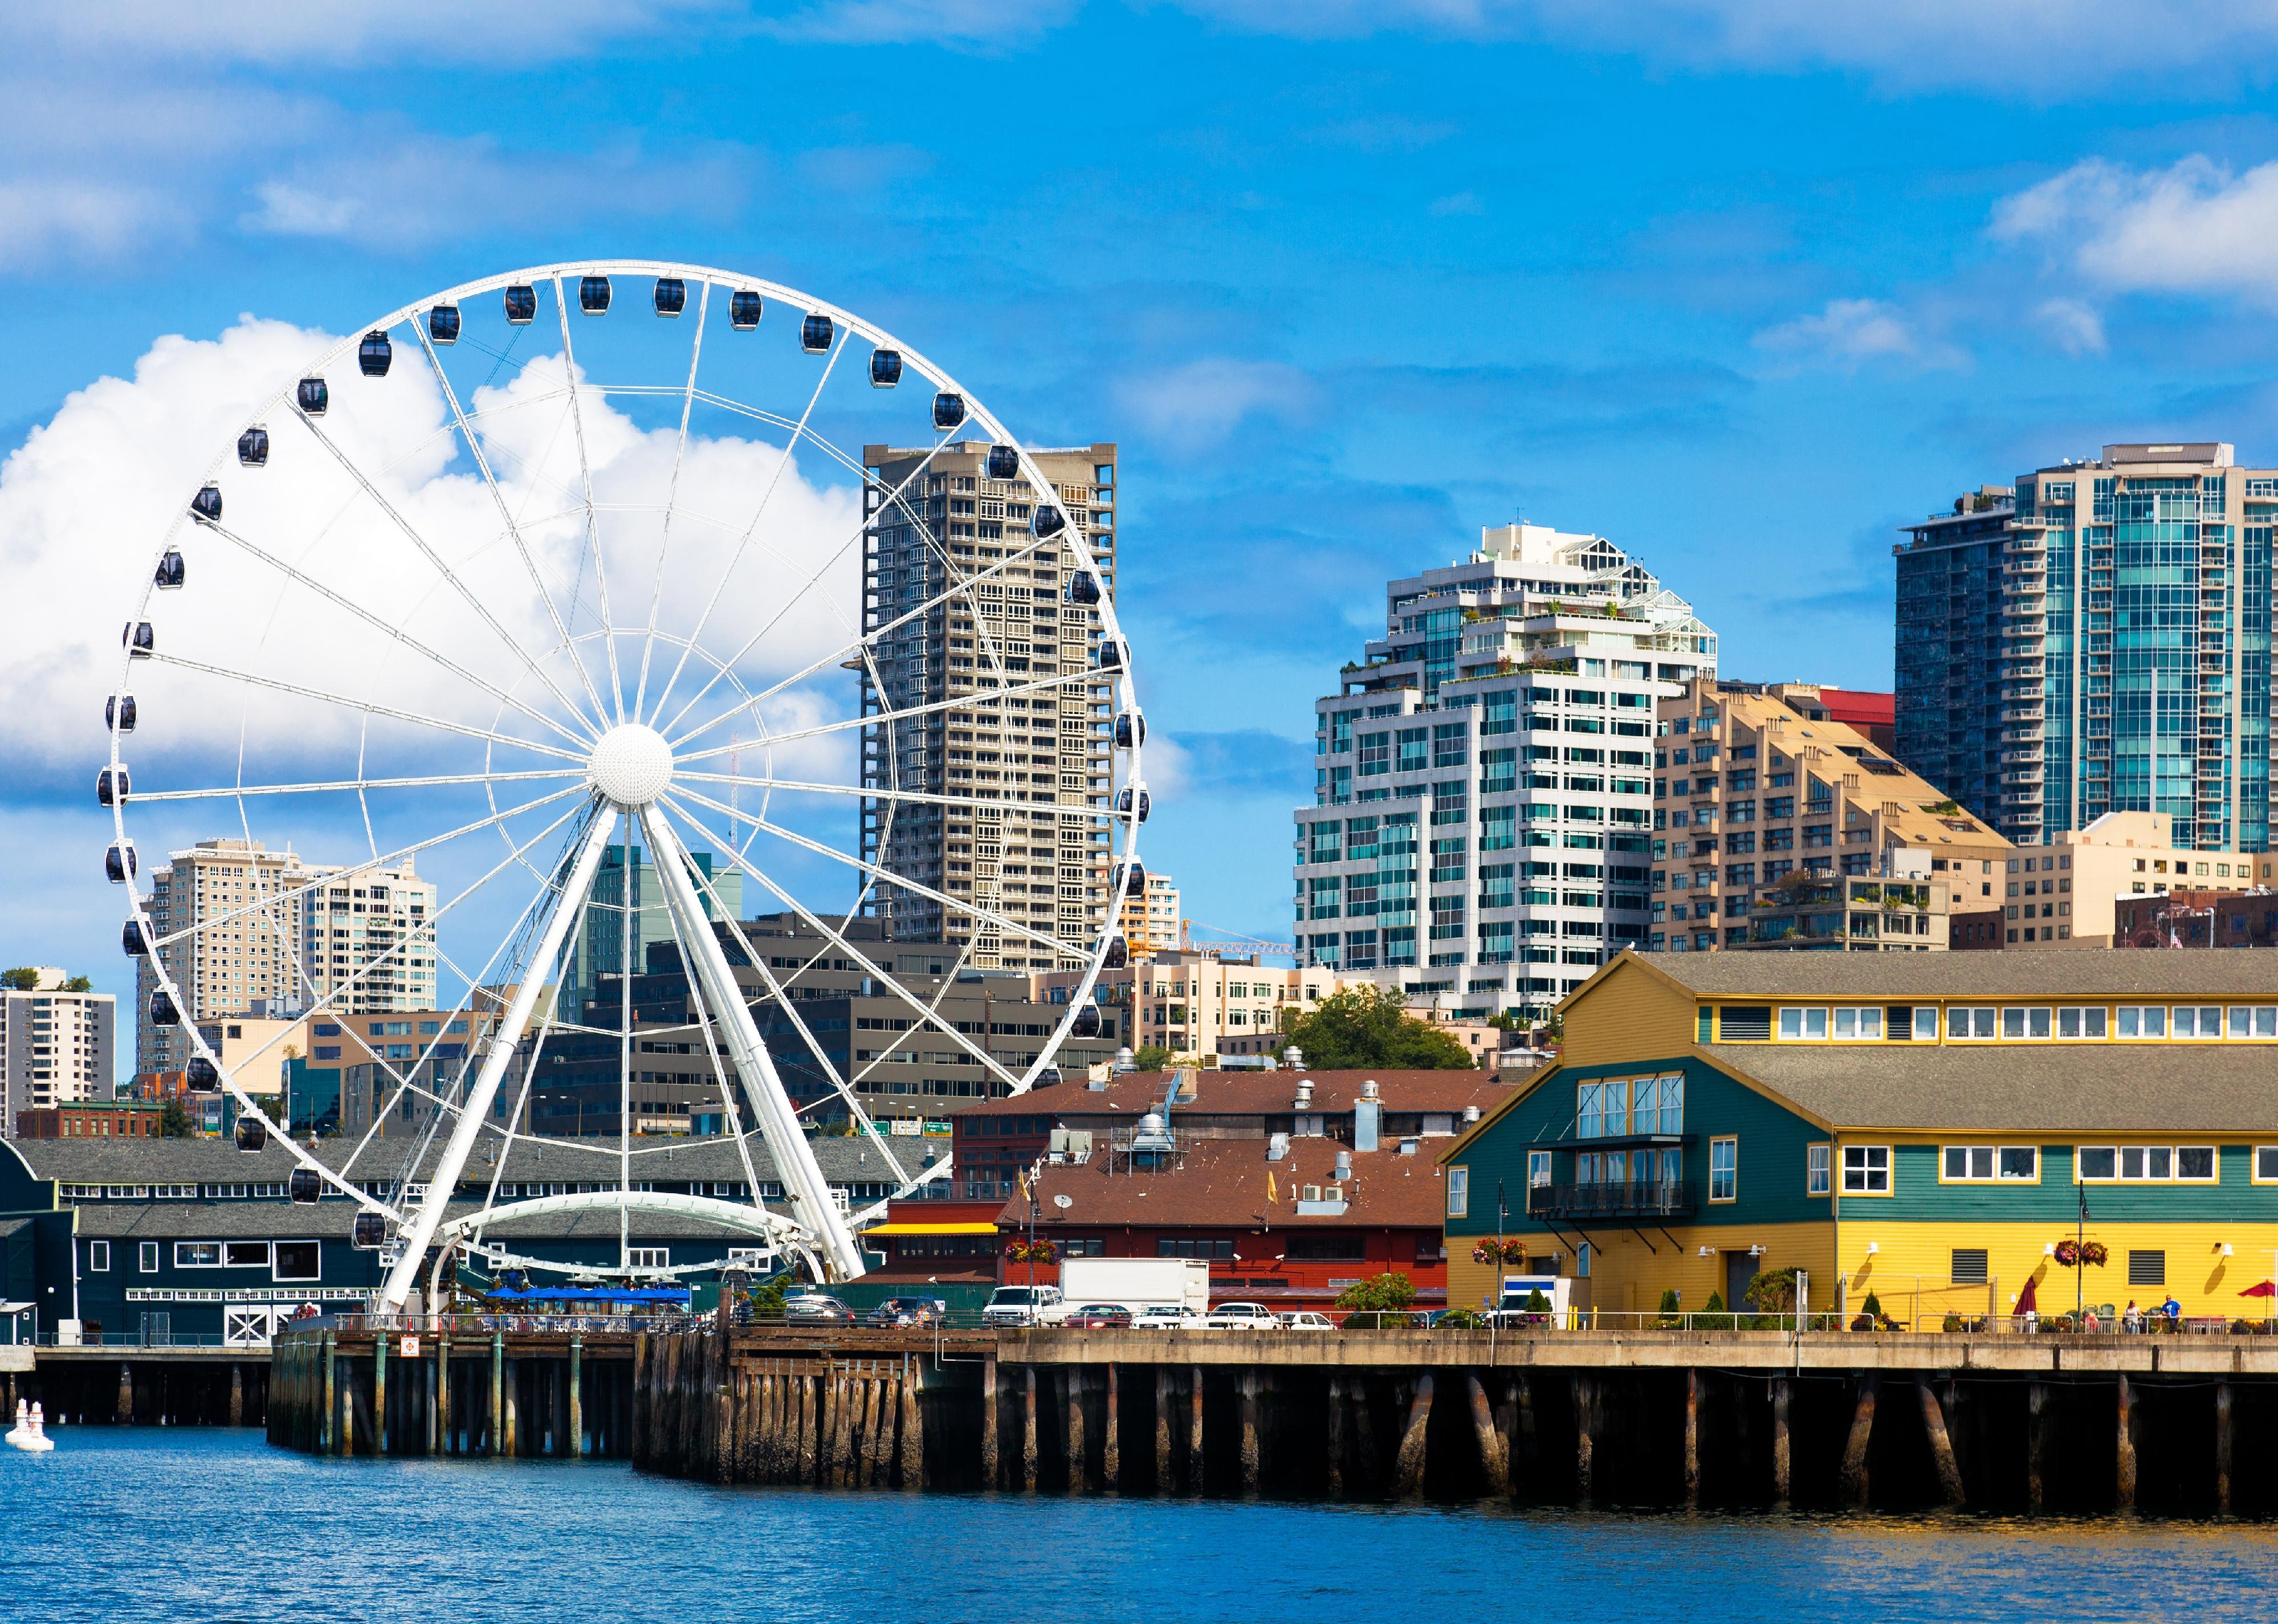 The Great Wheel is a popular Seattle attraction.